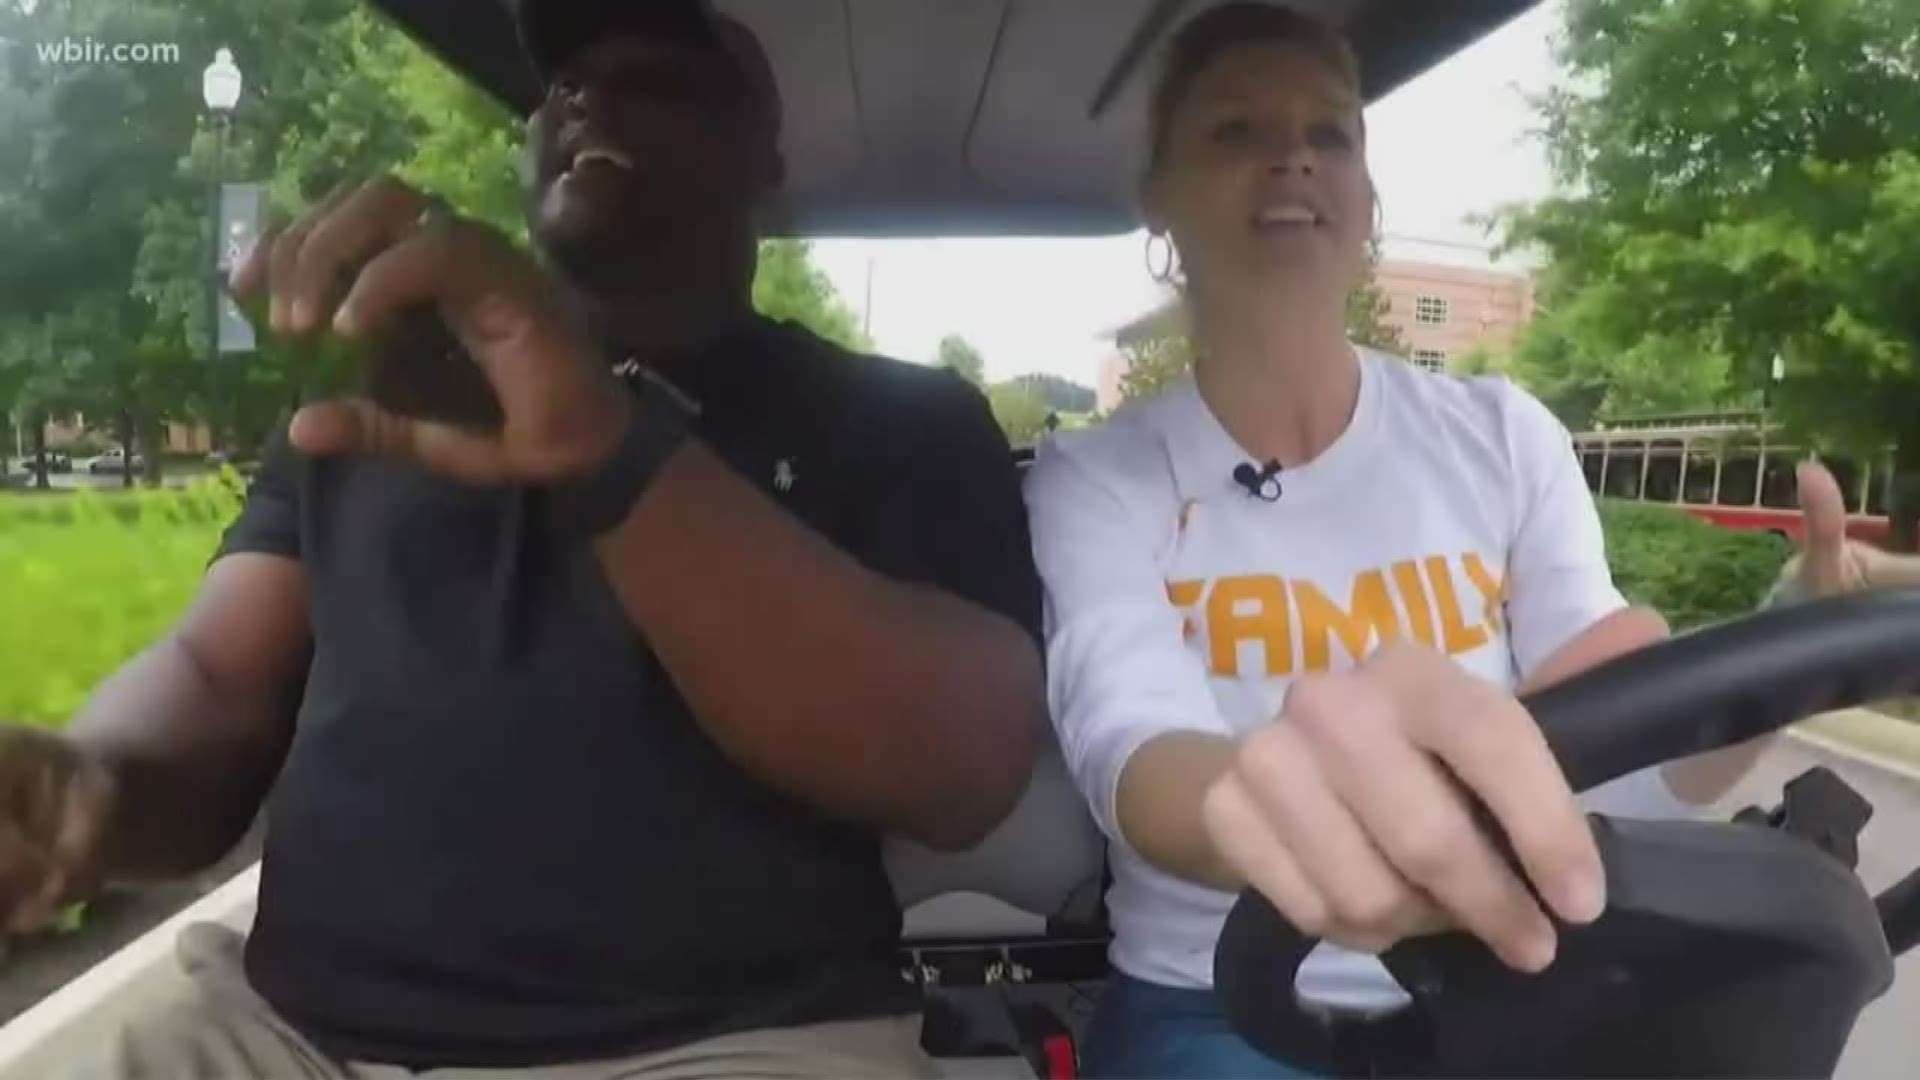 Yes, that is UT assistant football coach Tee Martin and Lady Vols head coach Kellie Harper singing. The VFLs went for a go-kart ride around campus reminiscing about their legendary 1998 seasons as players.